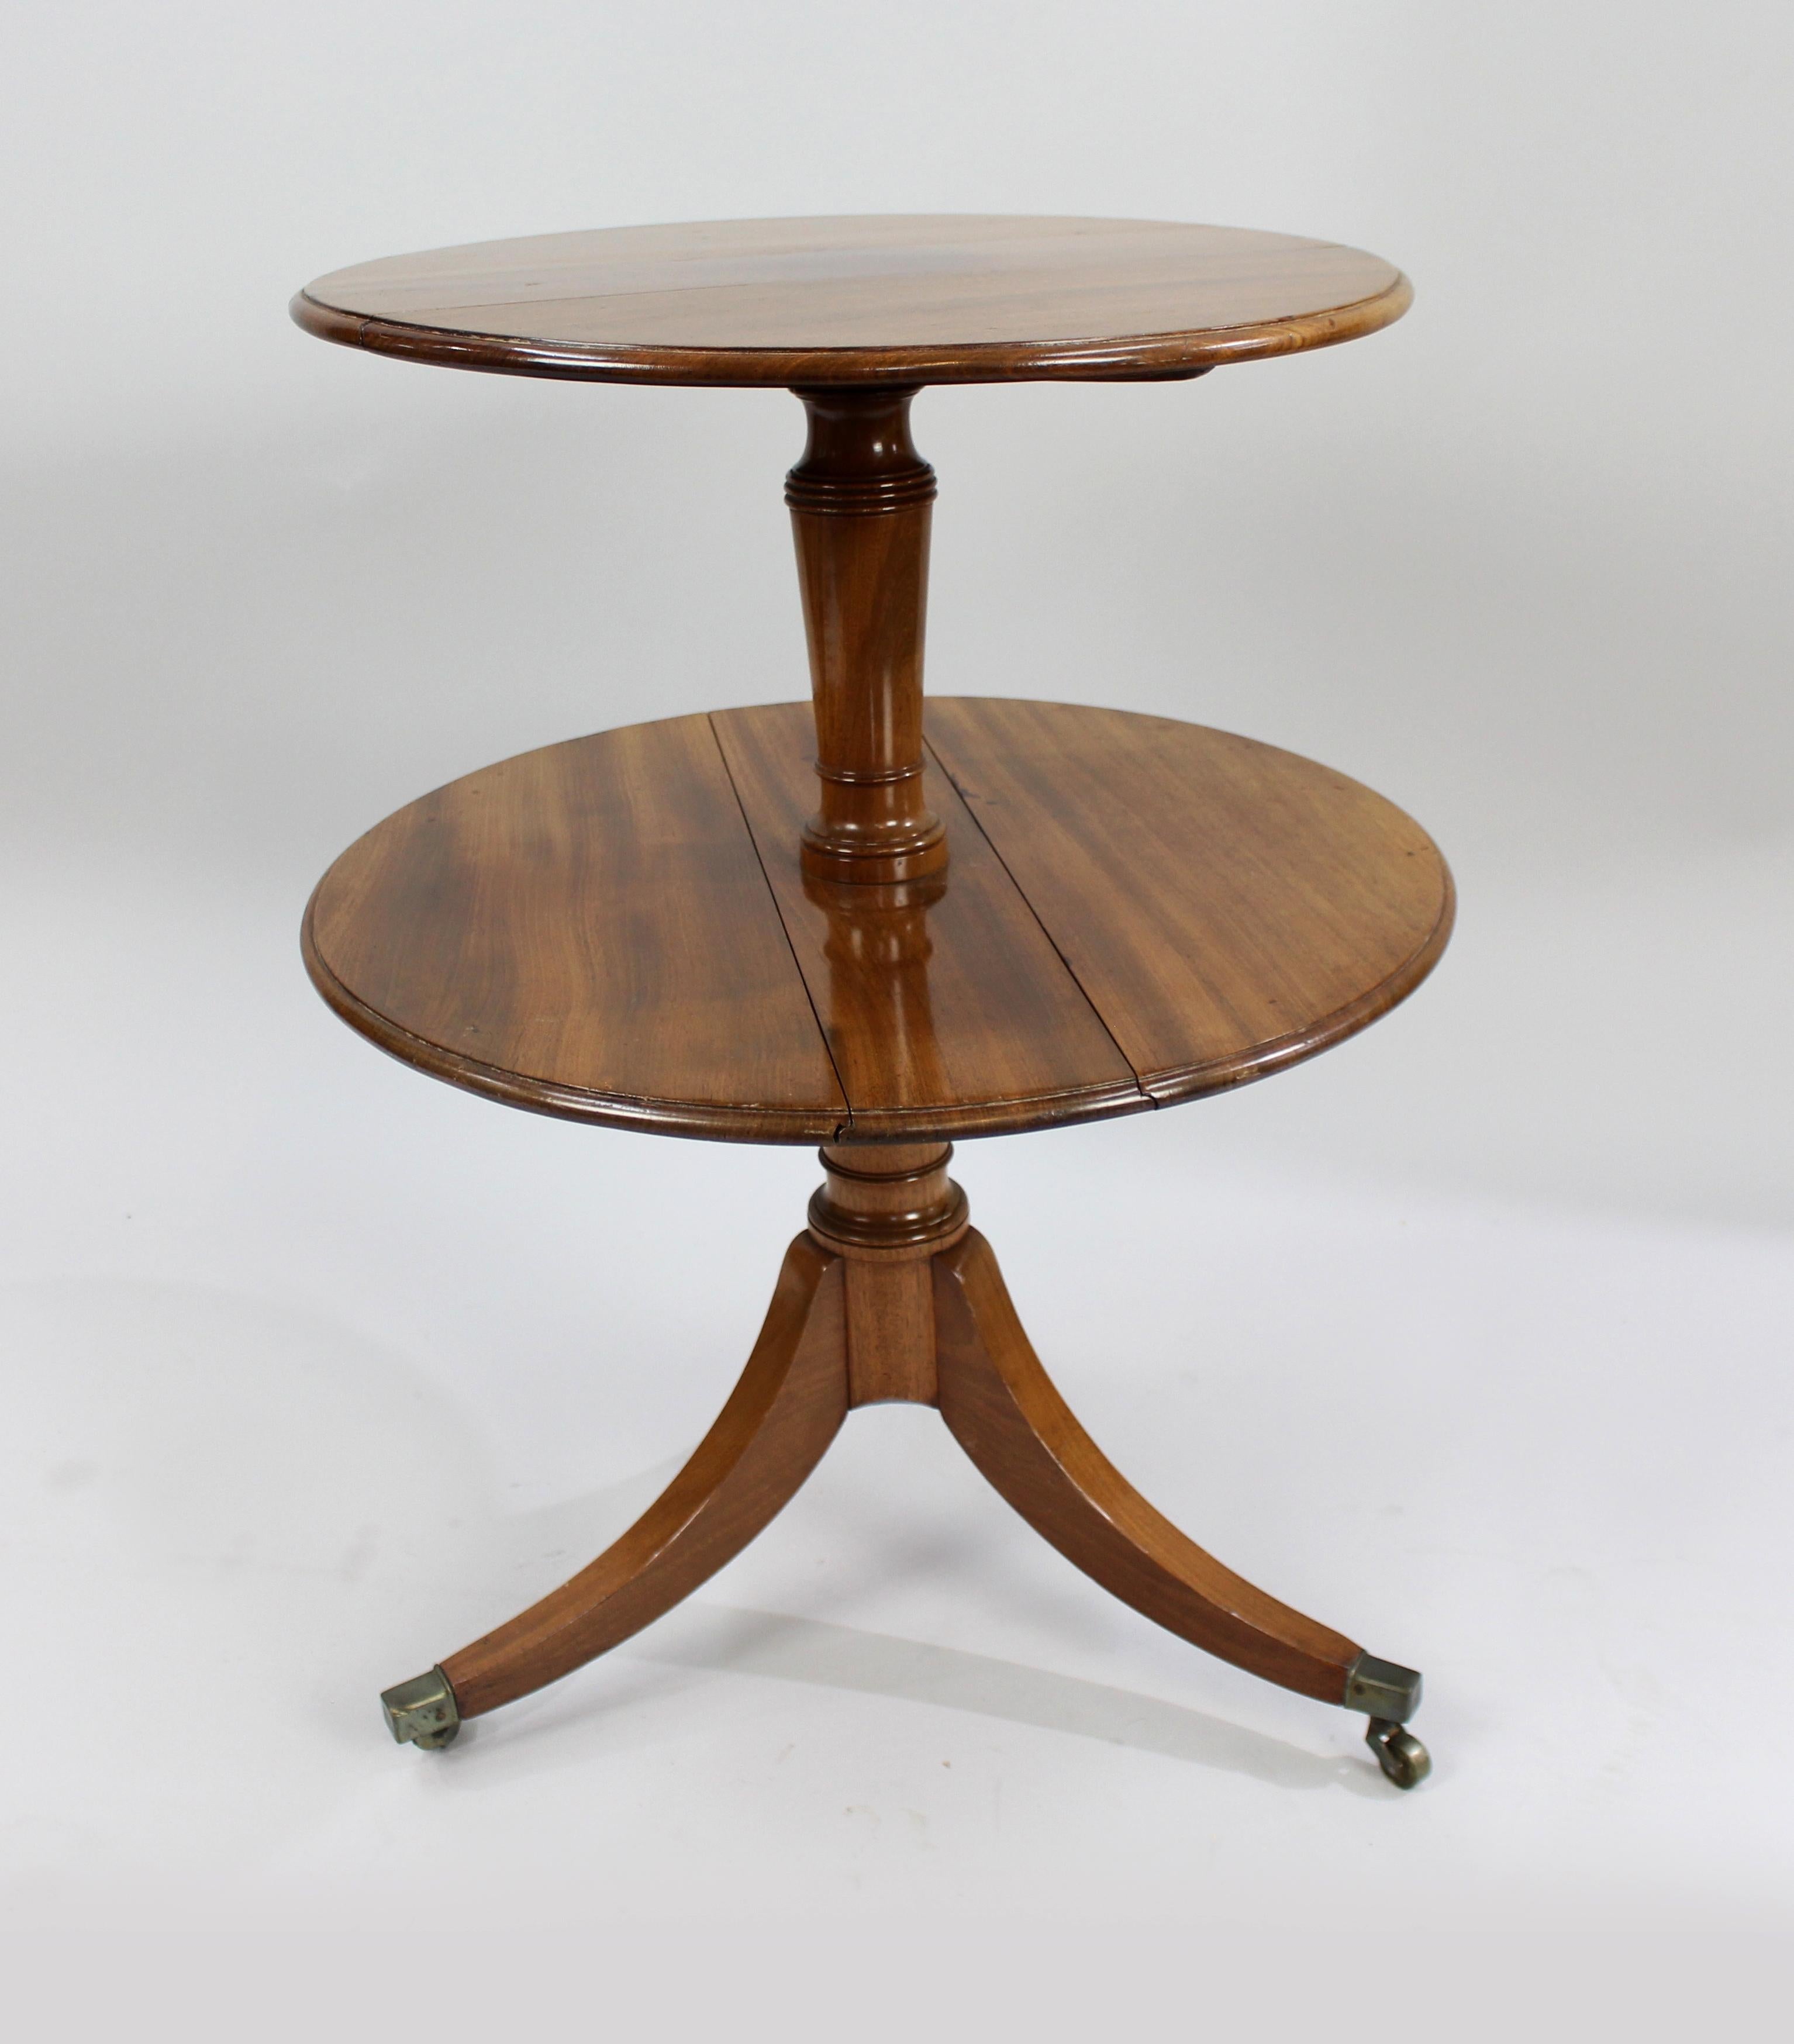 George III English mahogany two tier folding dumb waiter


First tier diameter 52 cm 20 1/2 in

Second tier diameter 60 cm 23 1/2 in

Height 75 cm 29 1/2 in
 

Period George III, c.1800, English

Wood mahogany

Condition good original